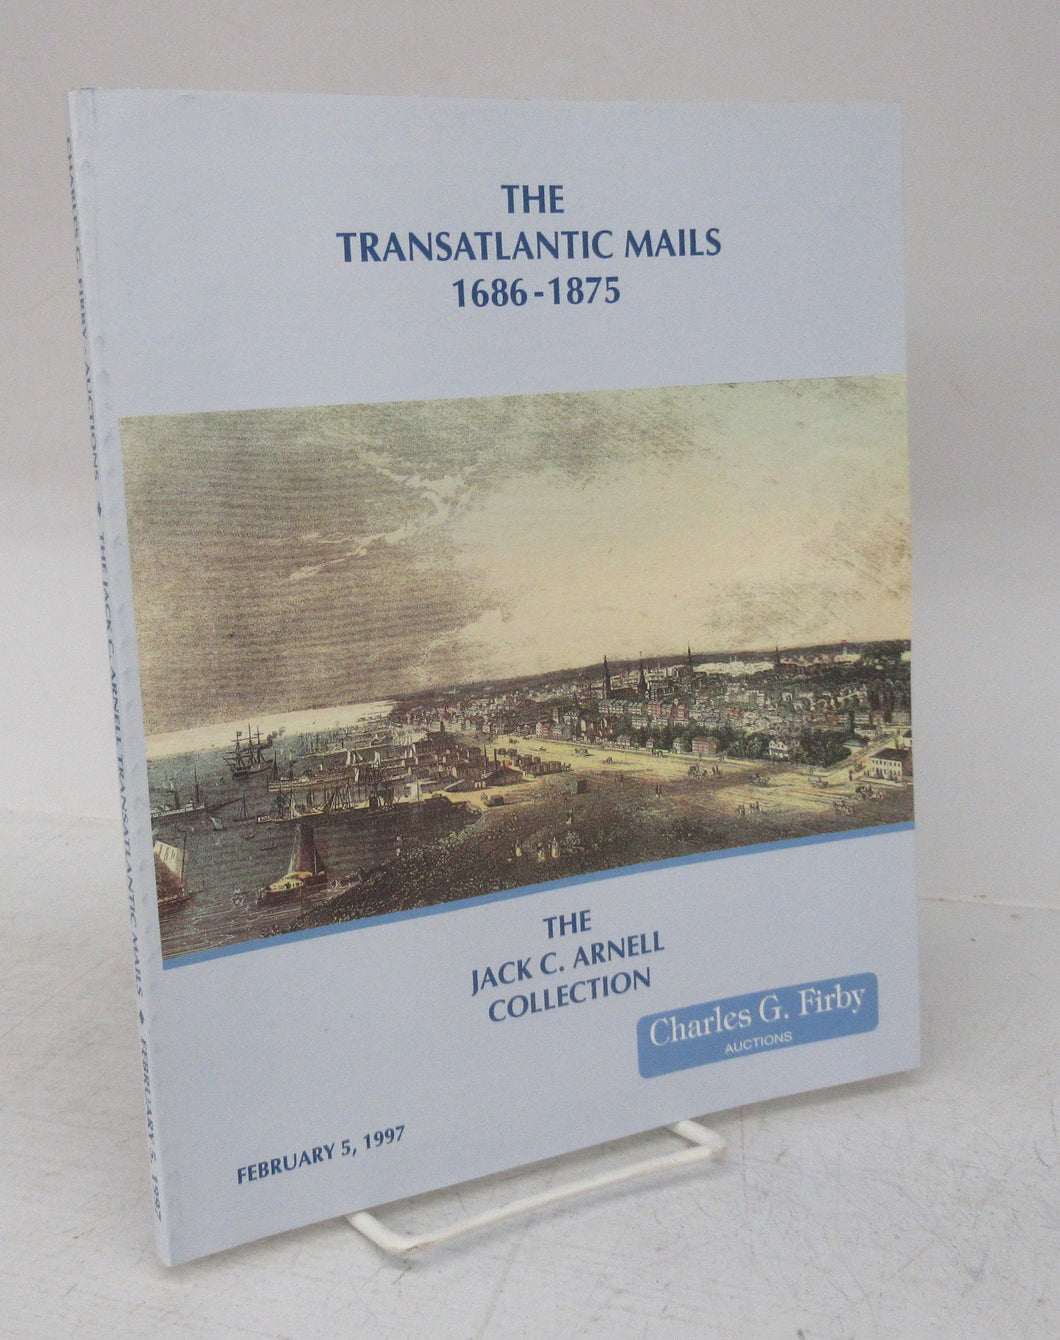 The Transatlantic Mails 1686-1875: The Jack C. Arnell Collection